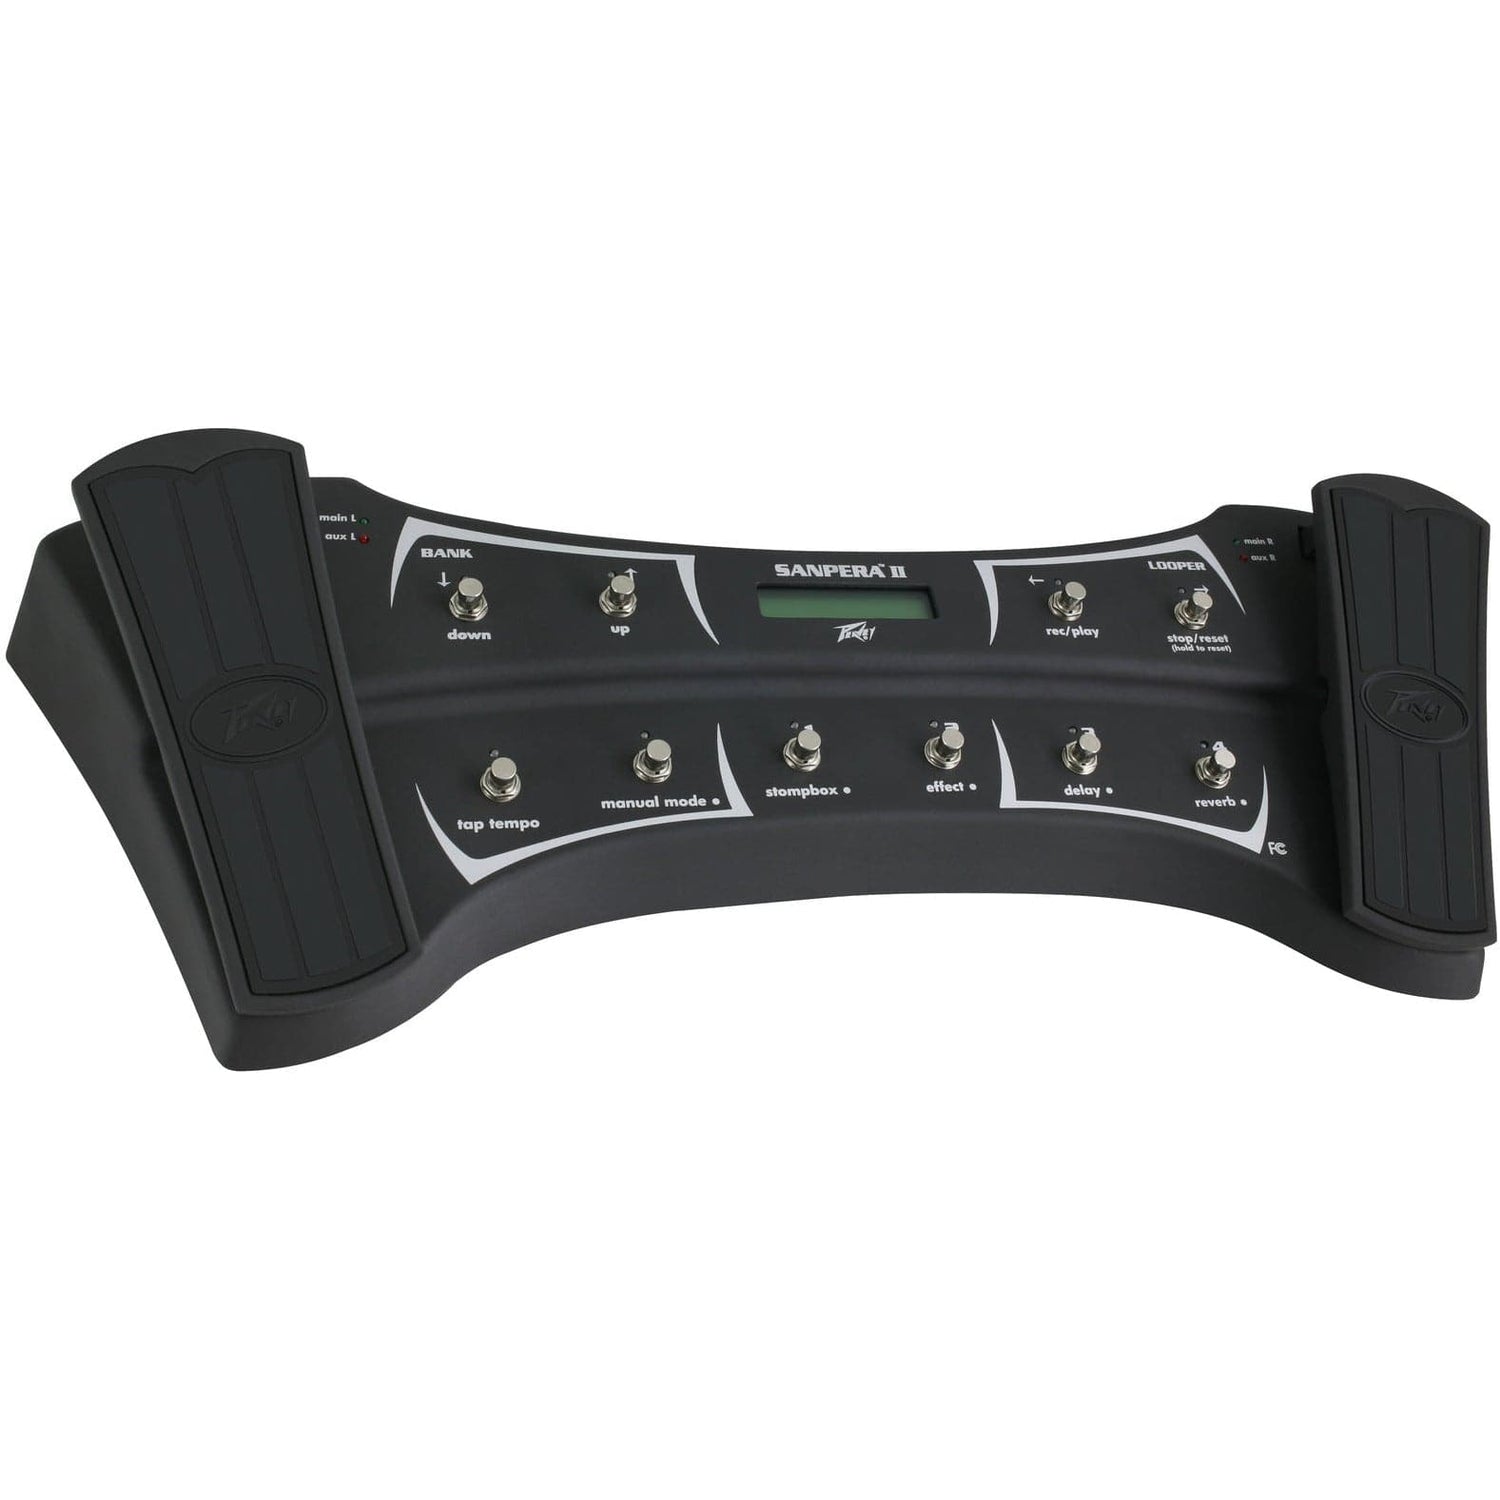 Peavey Vypyr VIP Series &quot;Sanpera II&quot; Foot Controller Pedal for Vypyr VIP Amps